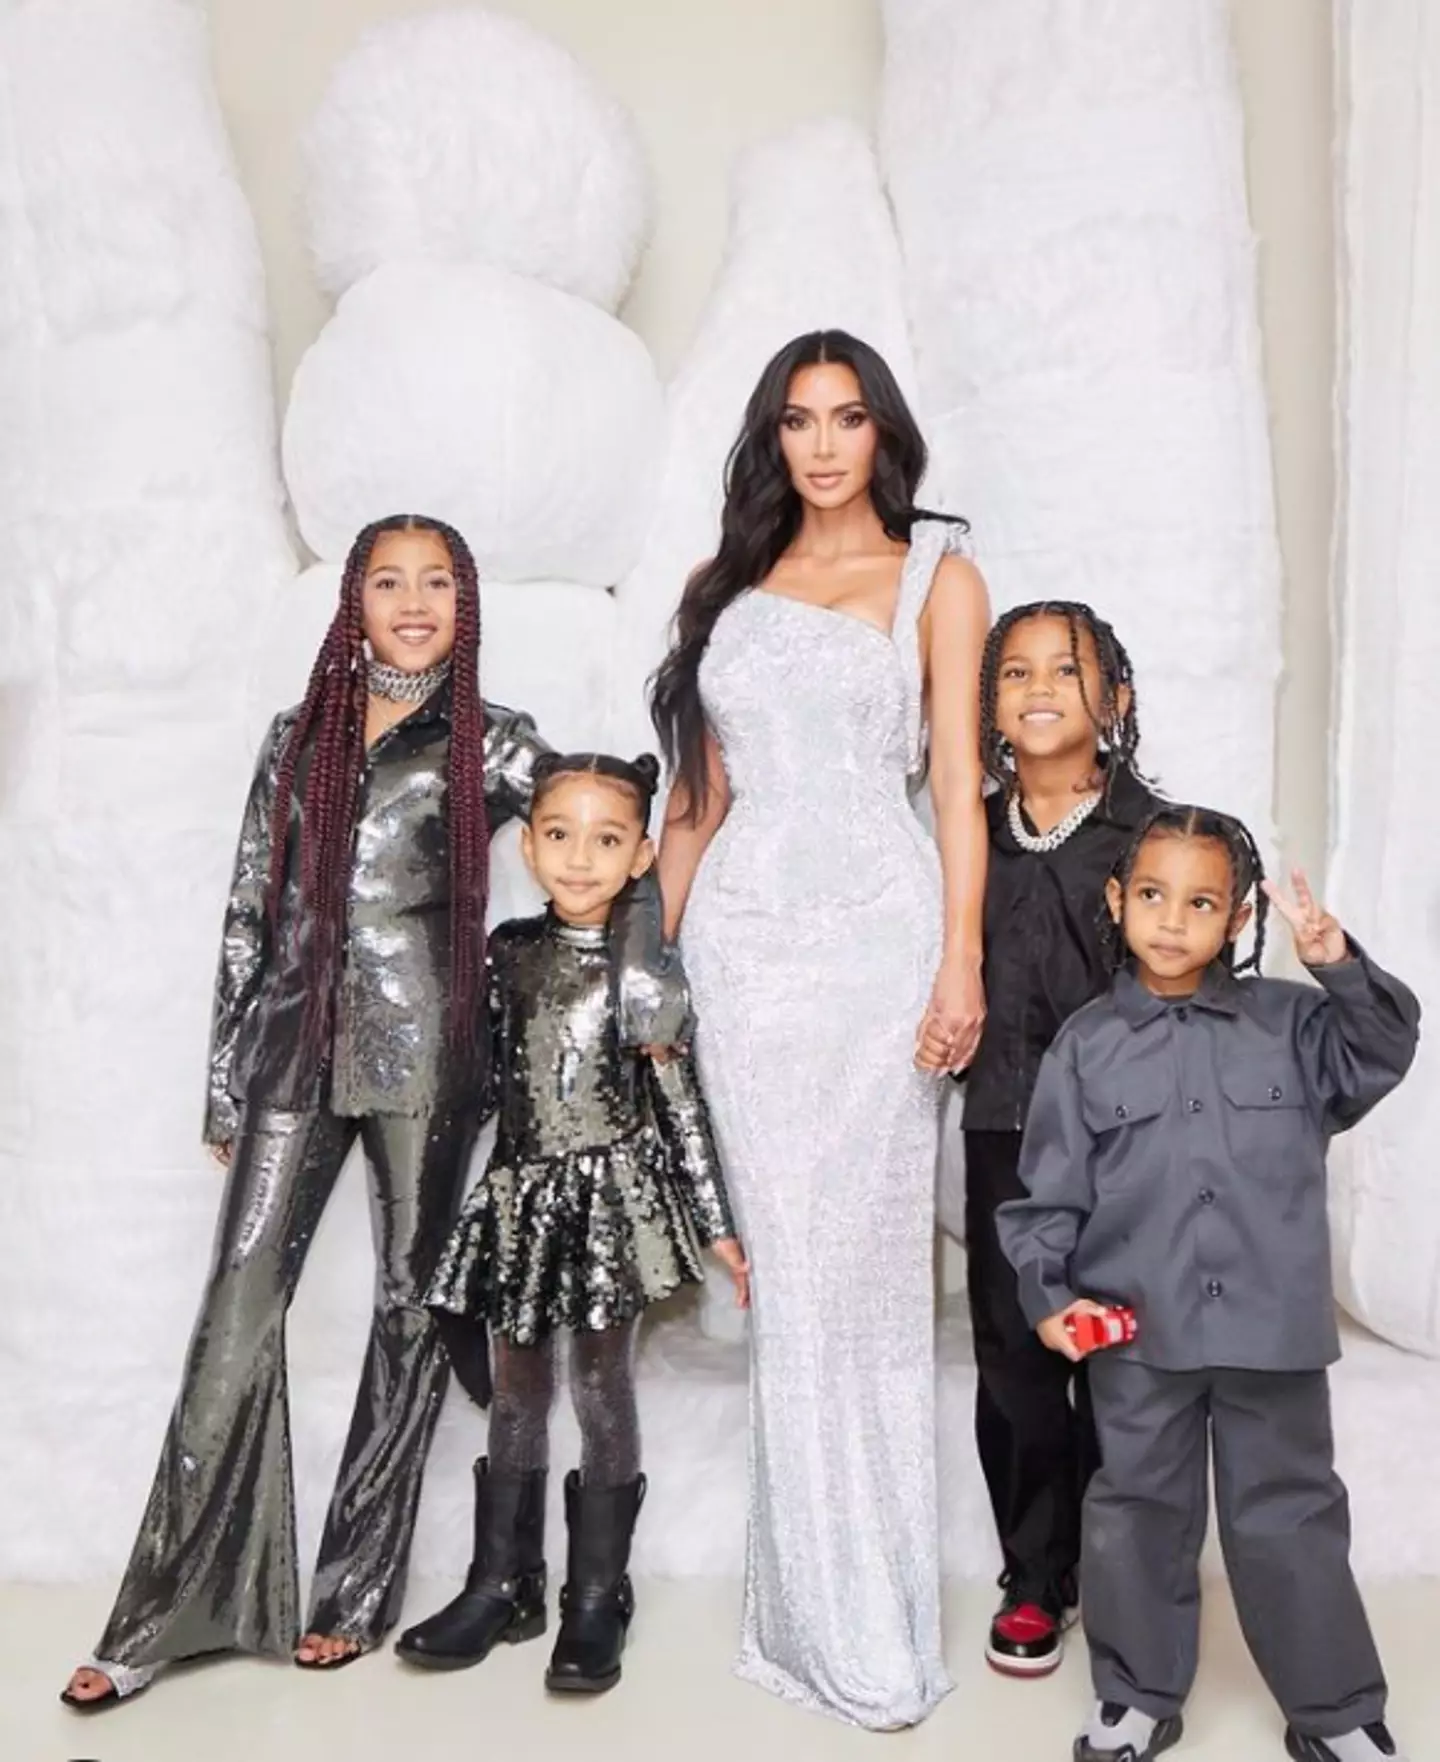 Kim shares kids North, Saint, Chicago, and Psalm with Kanye West.